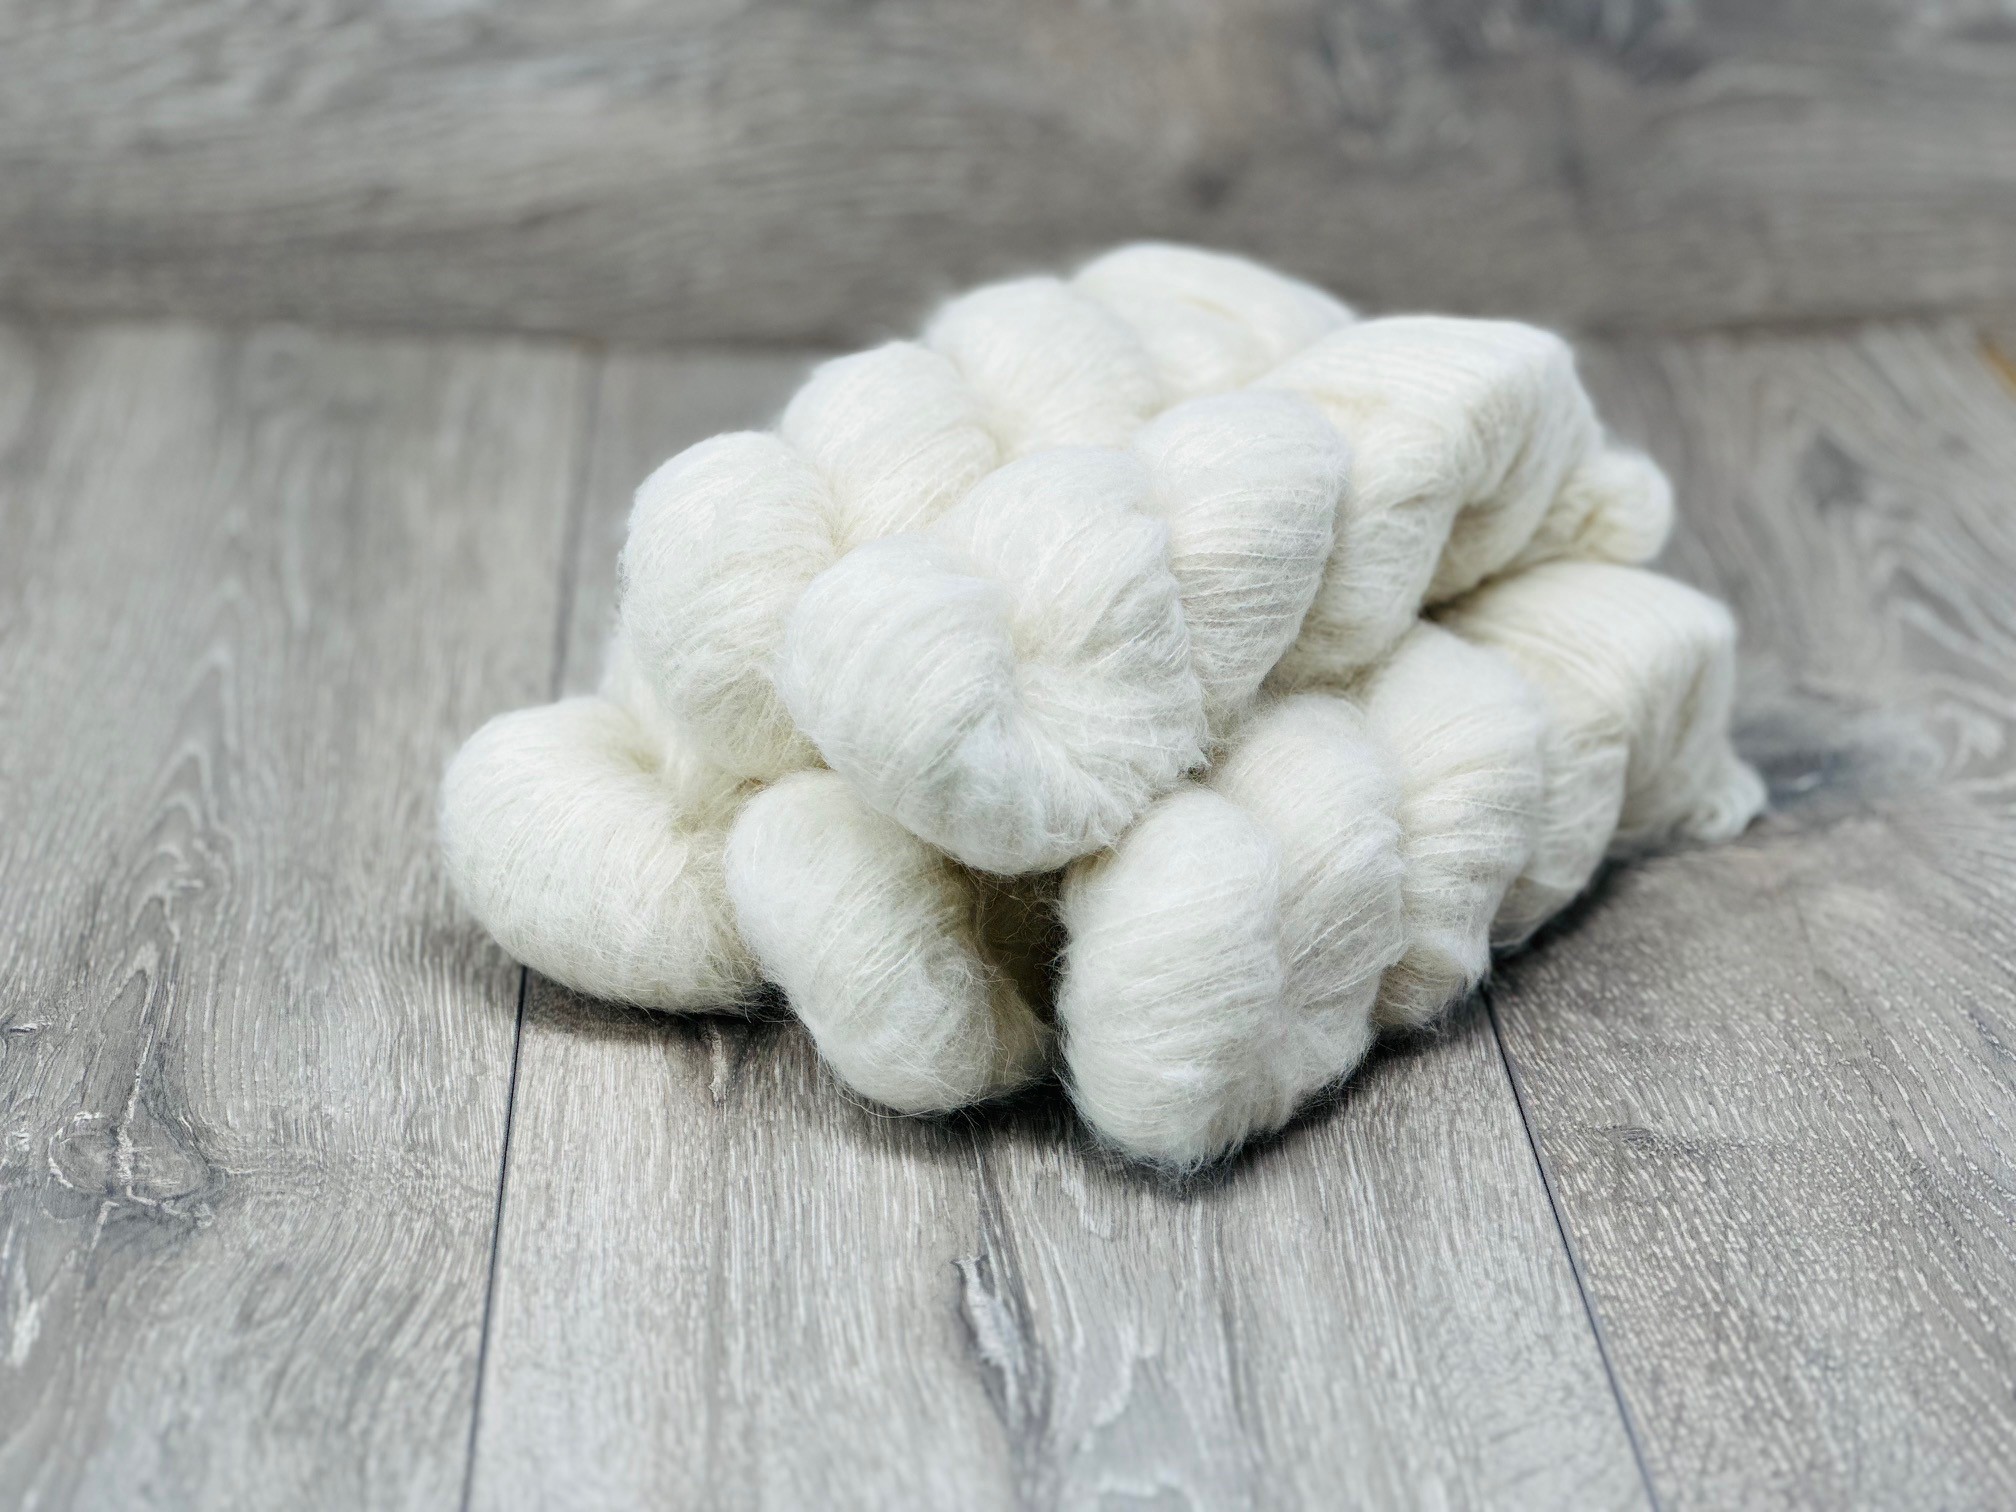 426 Undyed Yarn Images, Stock Photos, 3D objects, & Vectors